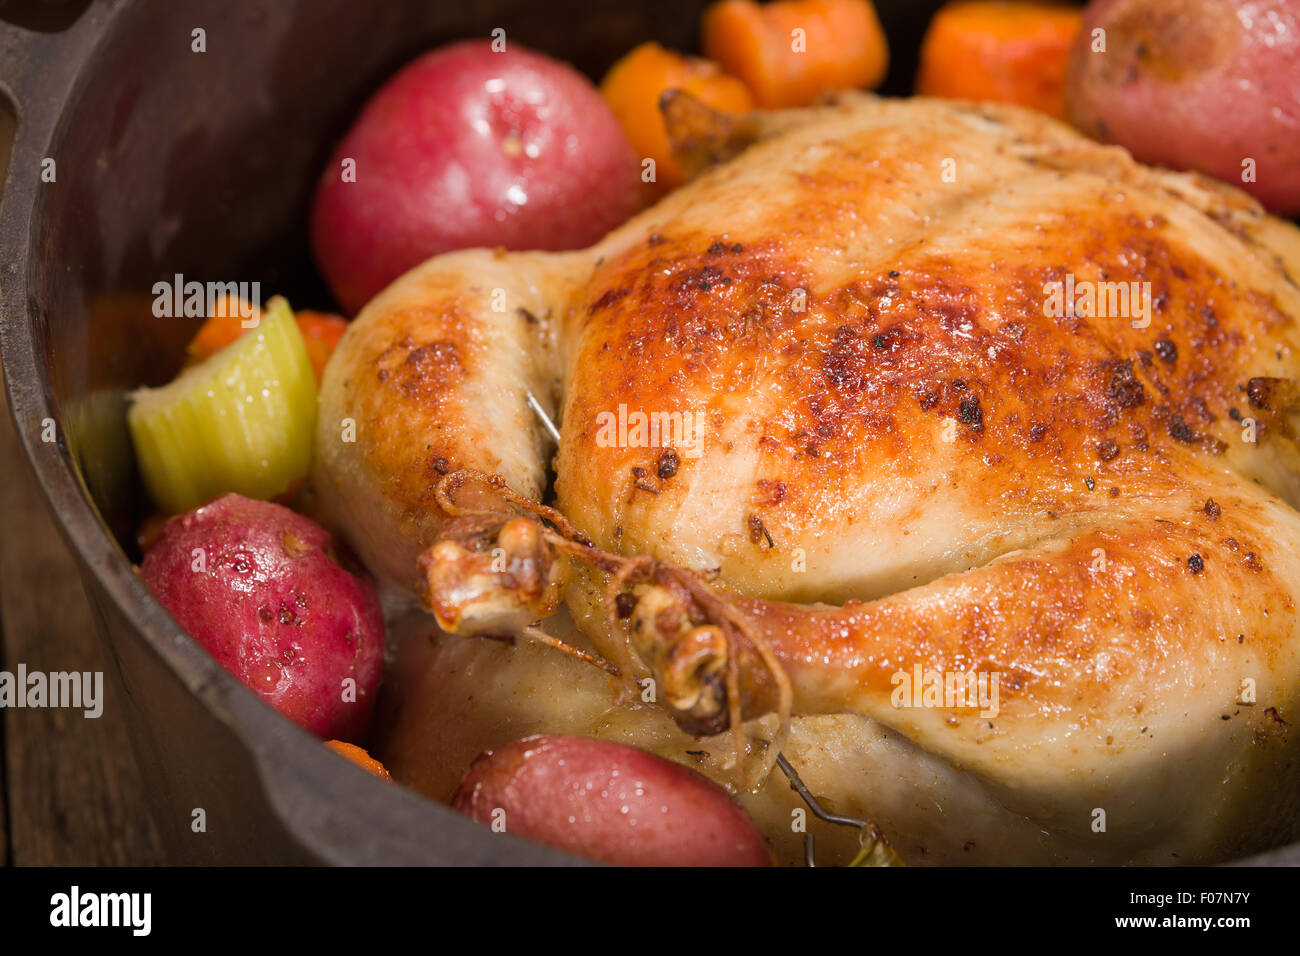 Dutch-style roasted chicken with baked red potatoes, carrots and celery, in a cast iron pot Stock Photo